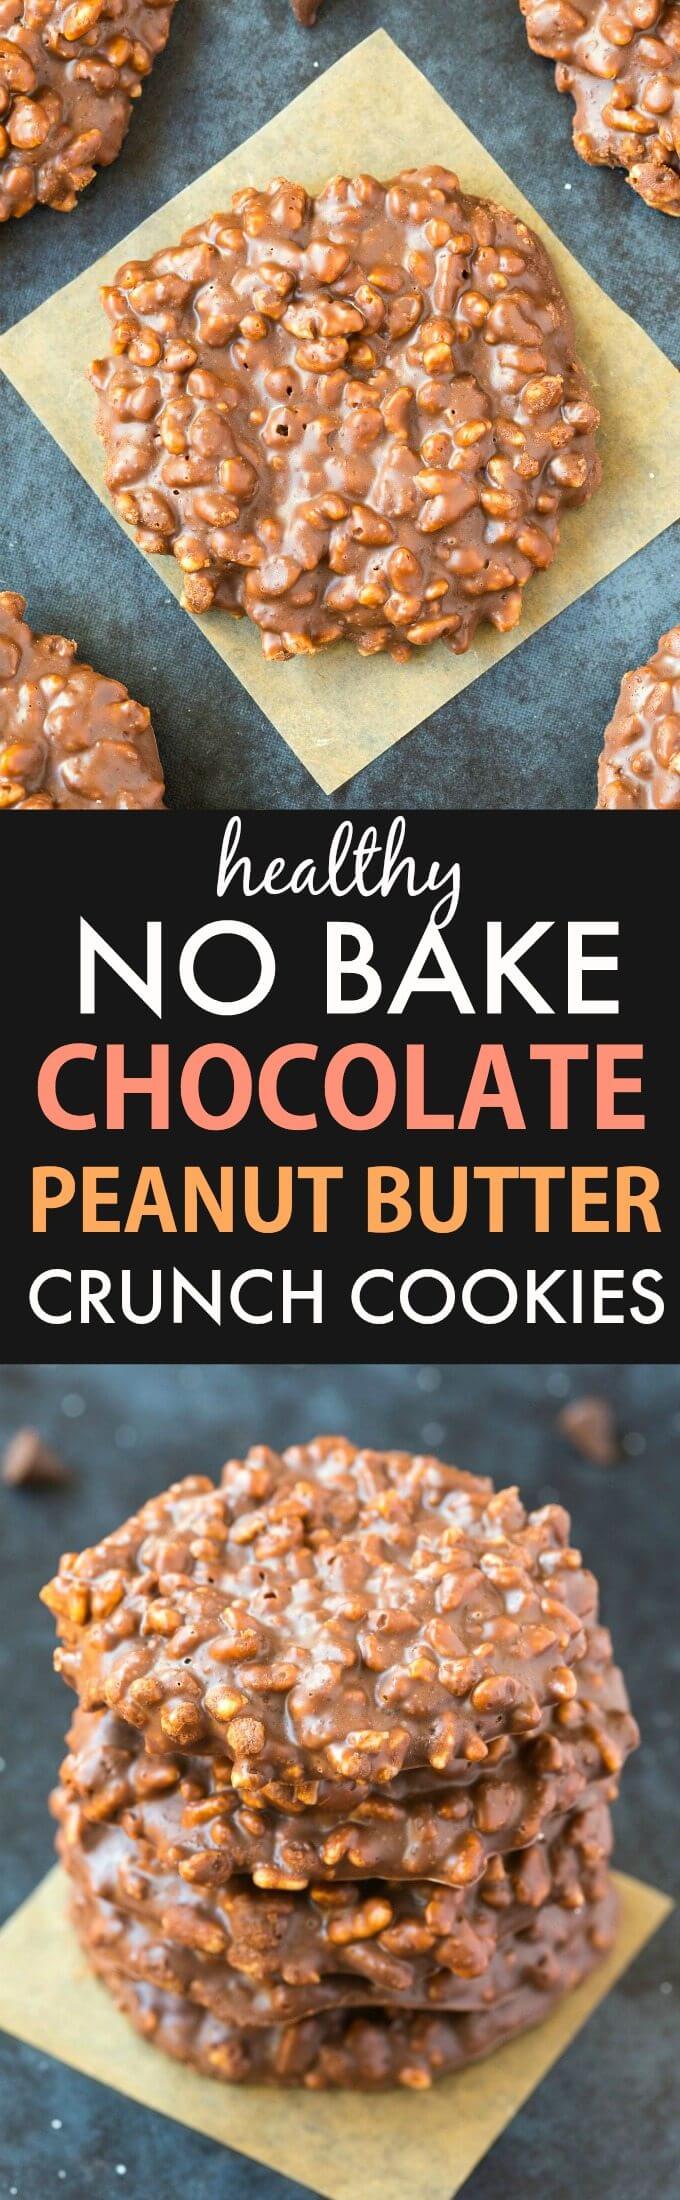 Healthy No Bake Chocolate Peanut Butter Crunch Cookies